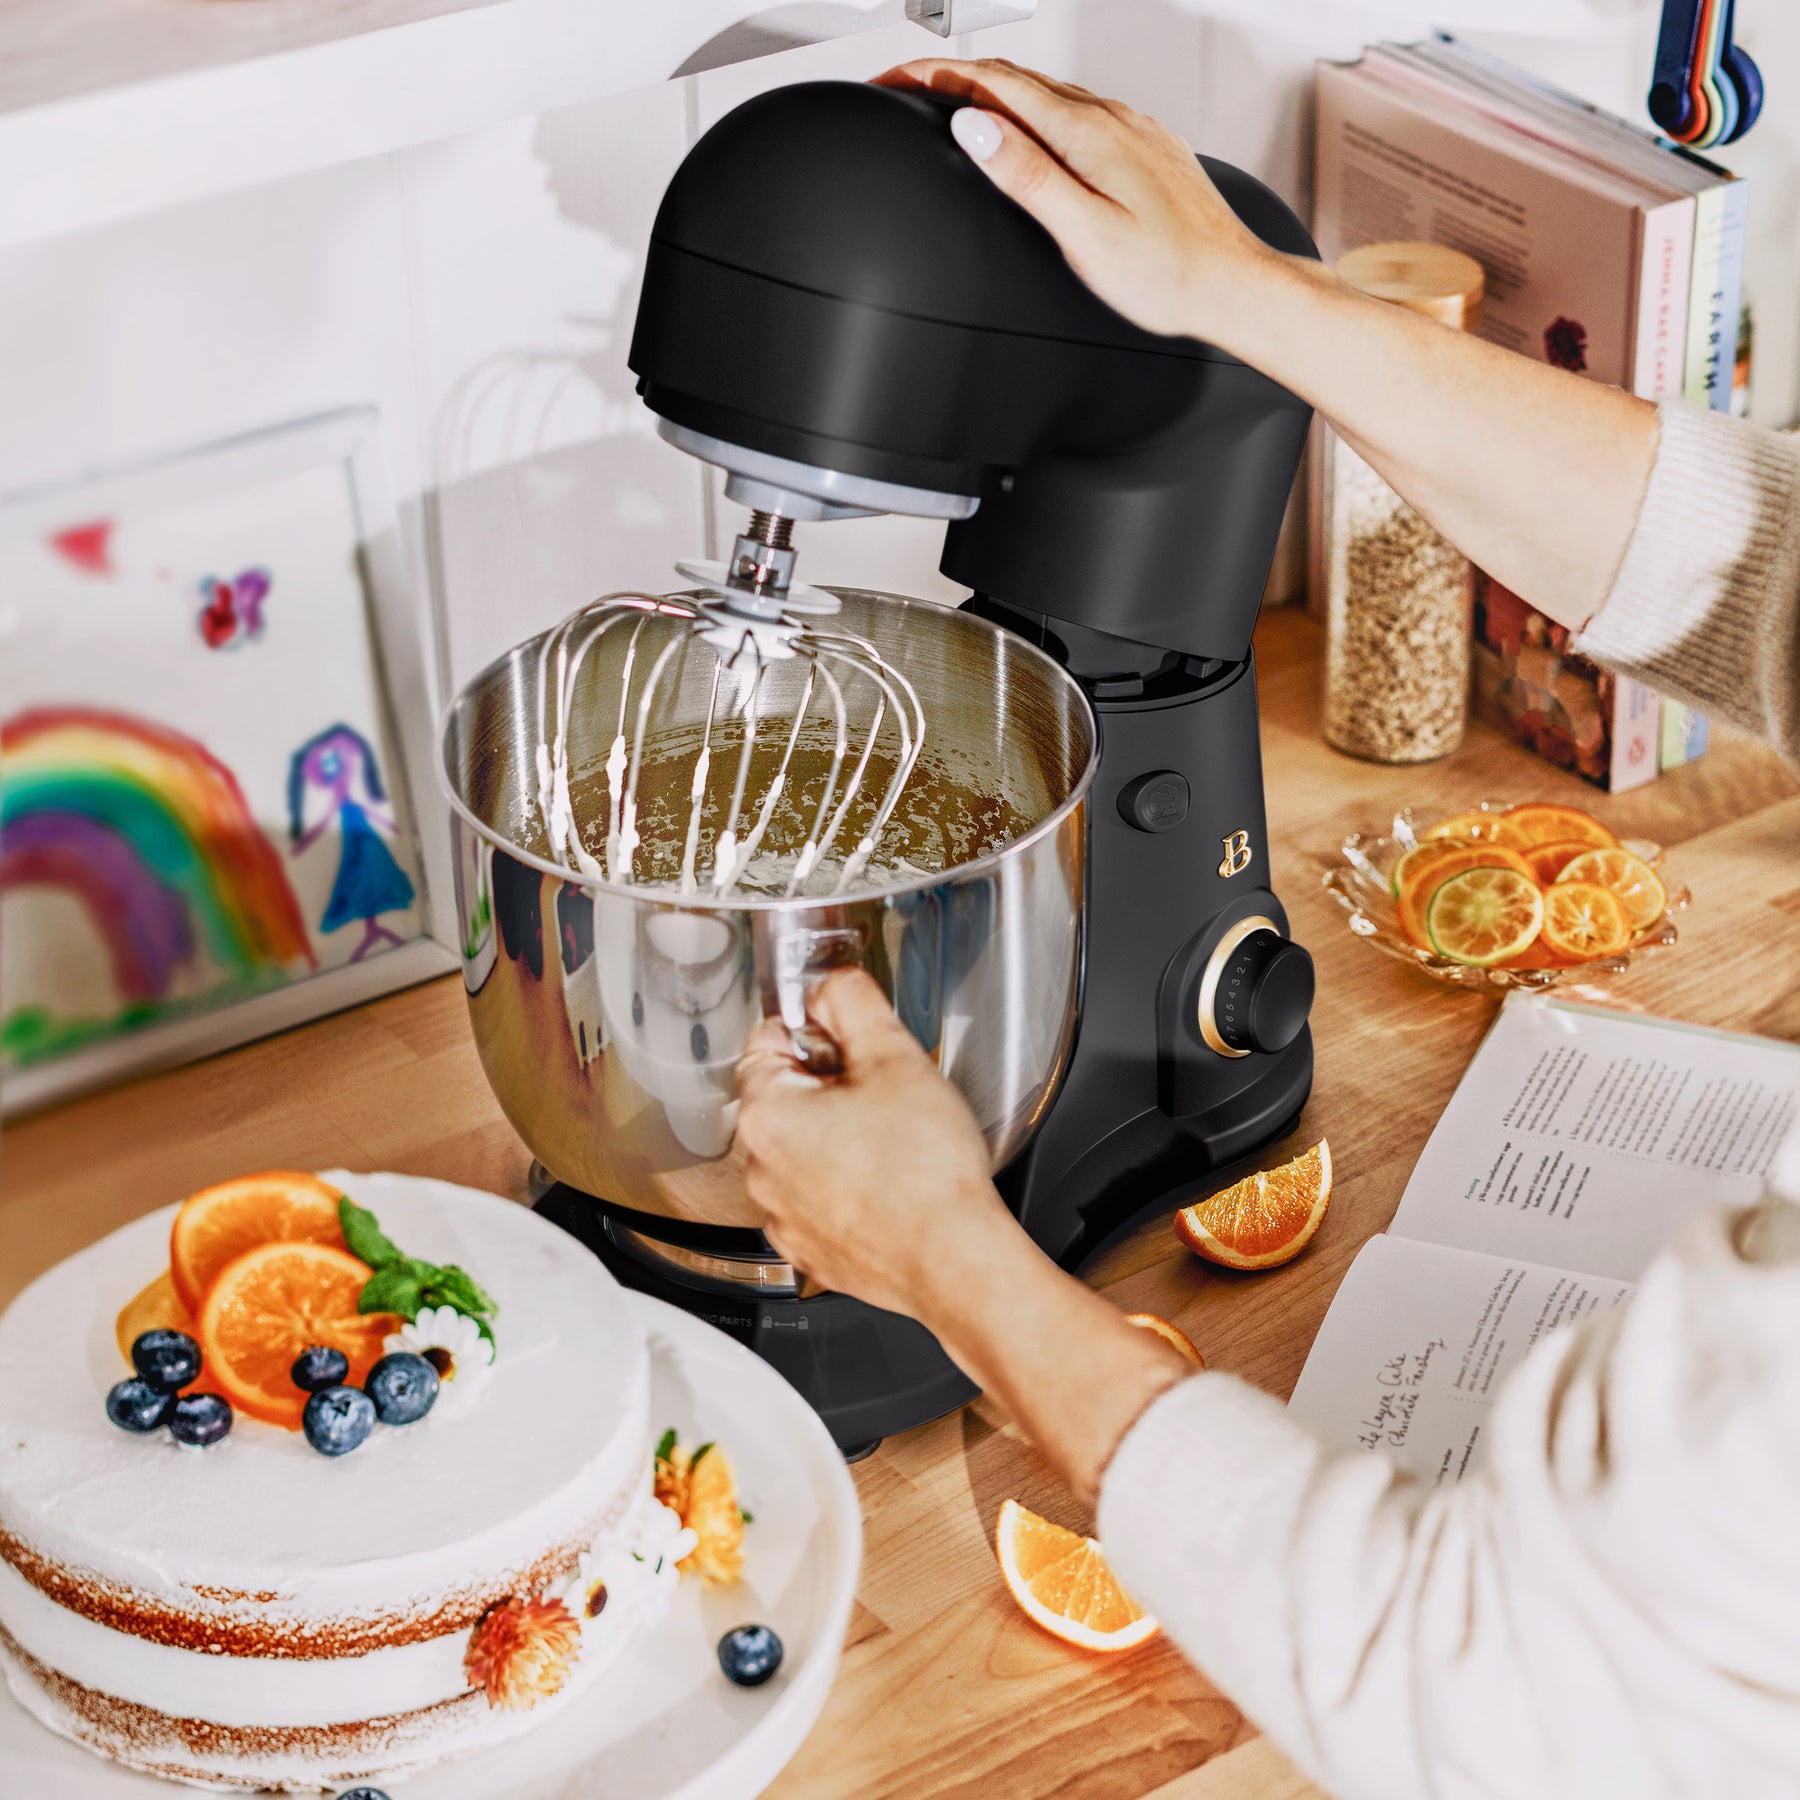 Beautiful by Drew Barrymore Stand Mixer: cheap cakes and cookies